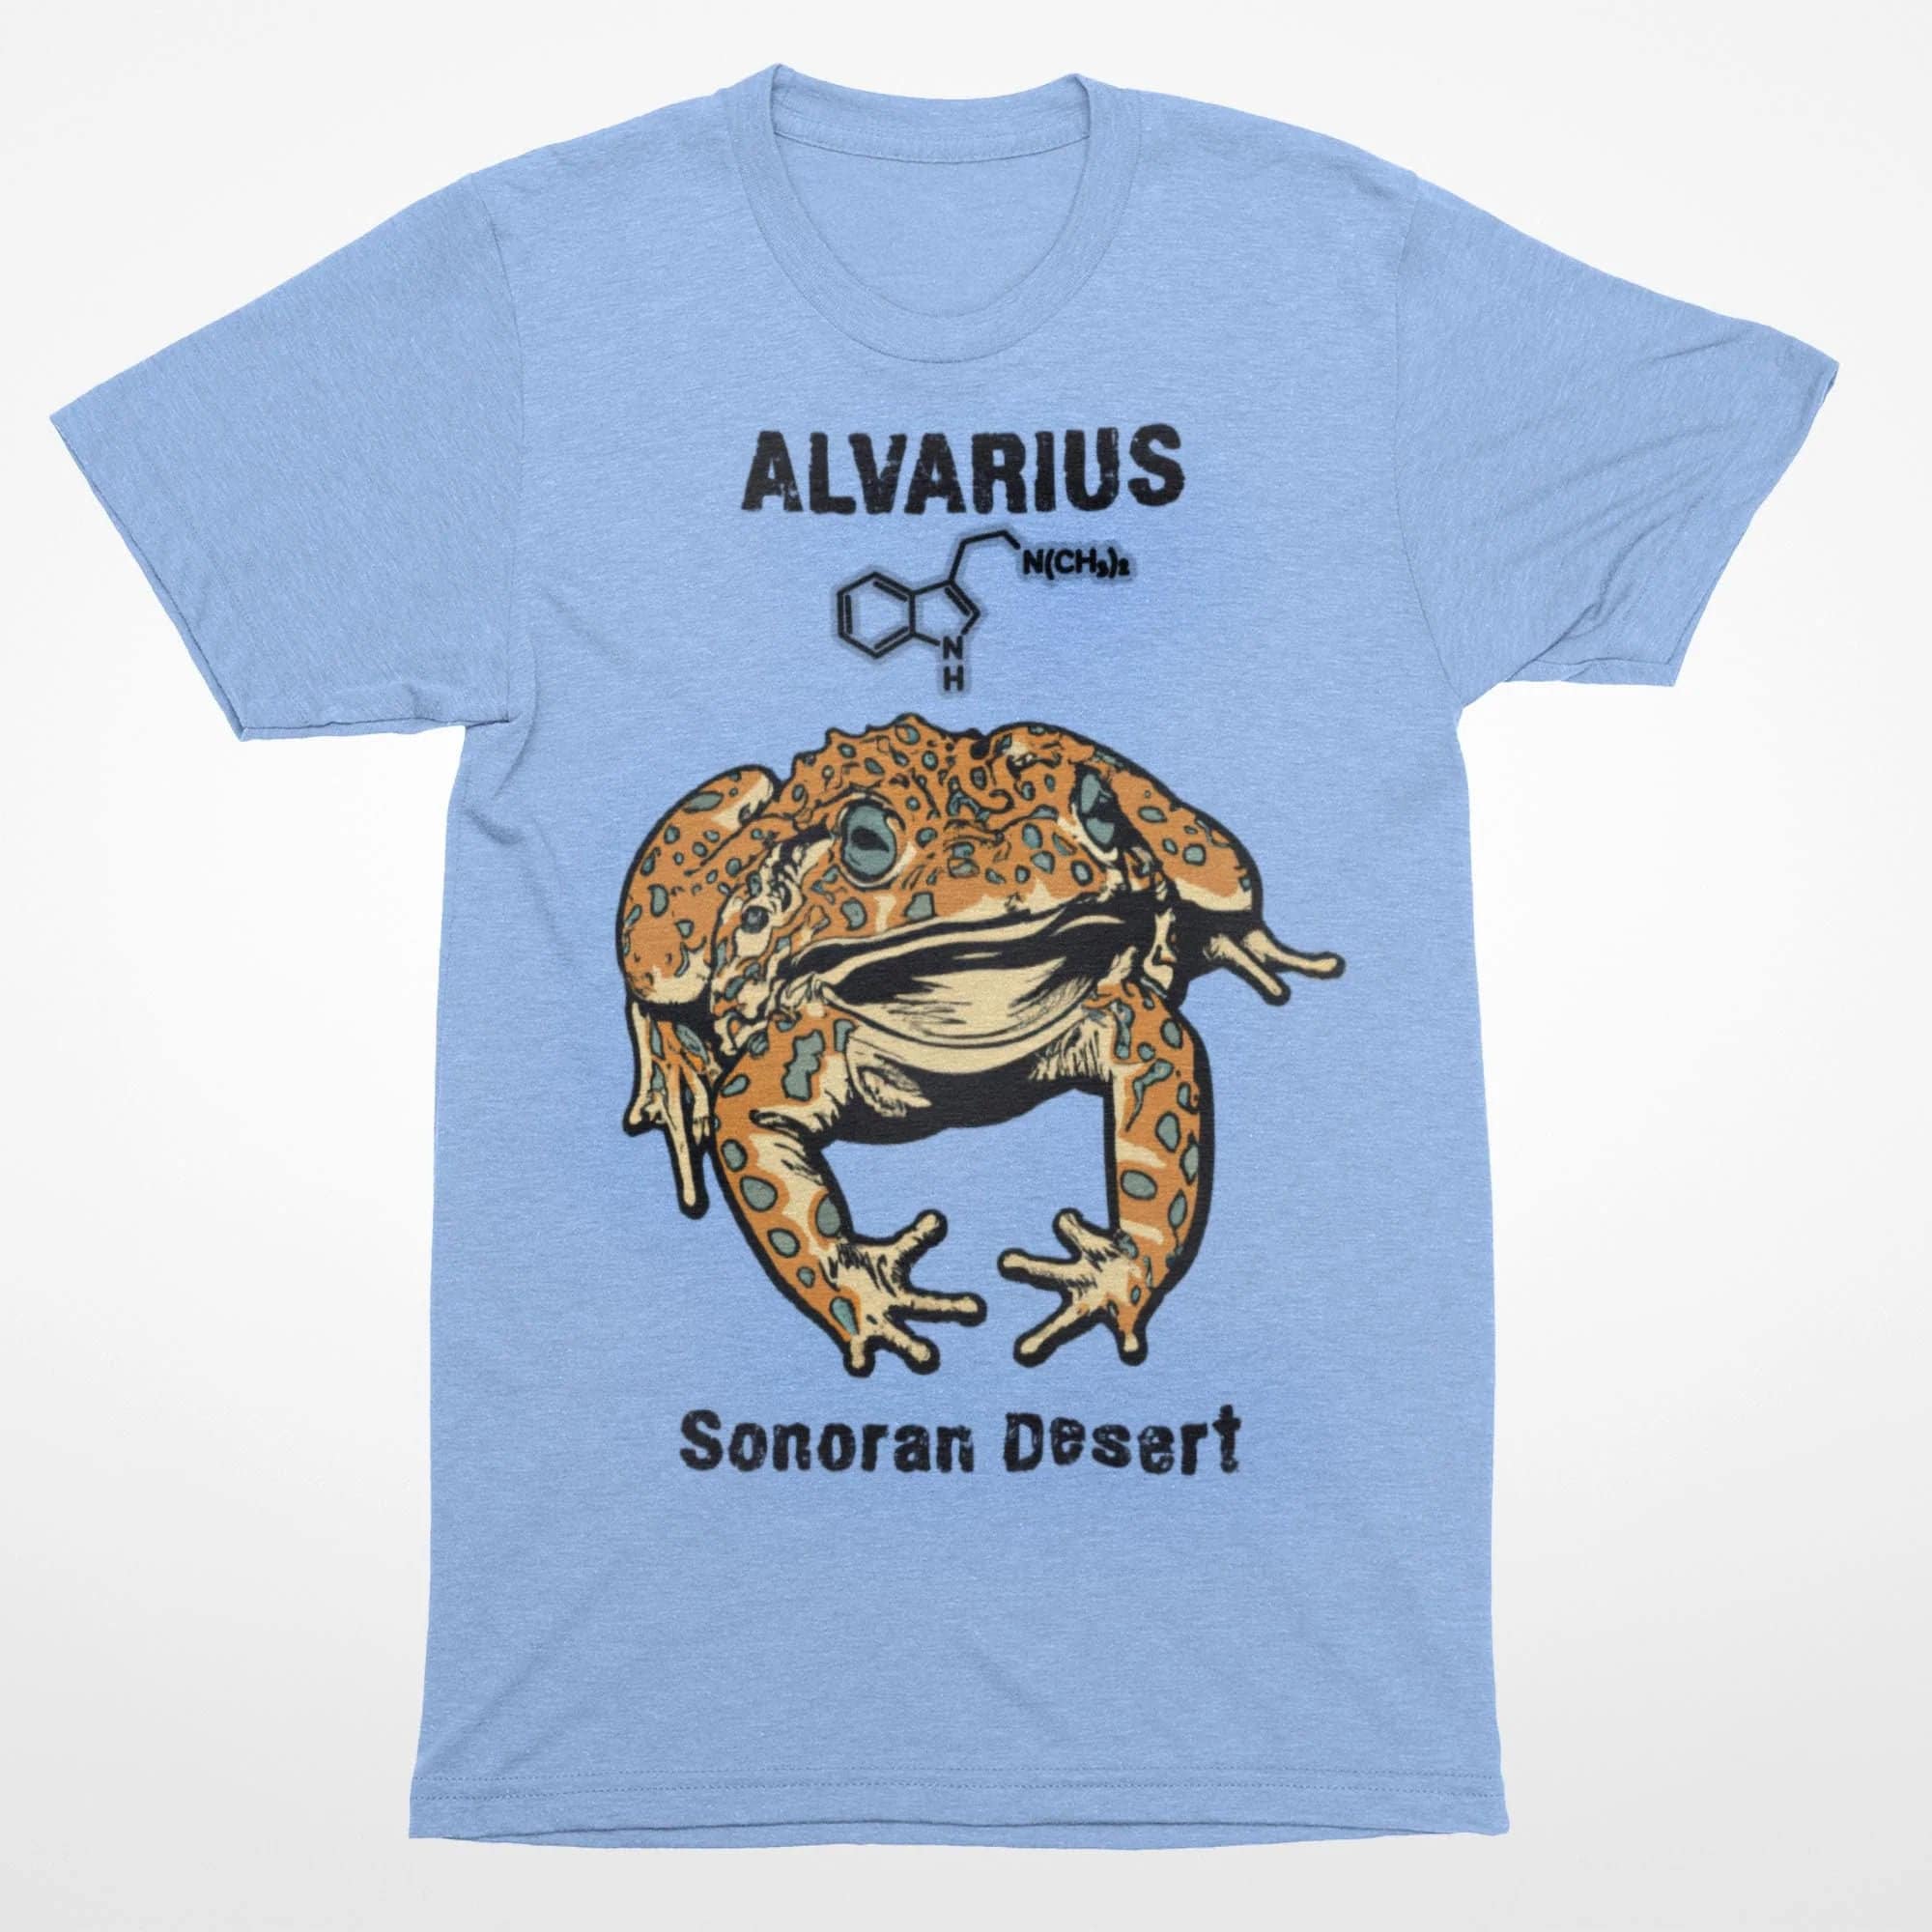 S / Carolina Blue Bufo Alvarius Toad, The Sonoran Desert 5-MeO DMT Psychedelic Frog, Trippy Ayahuasca Weed Chemistry | 420 Spiritual Digital Art T-Shirt Tee